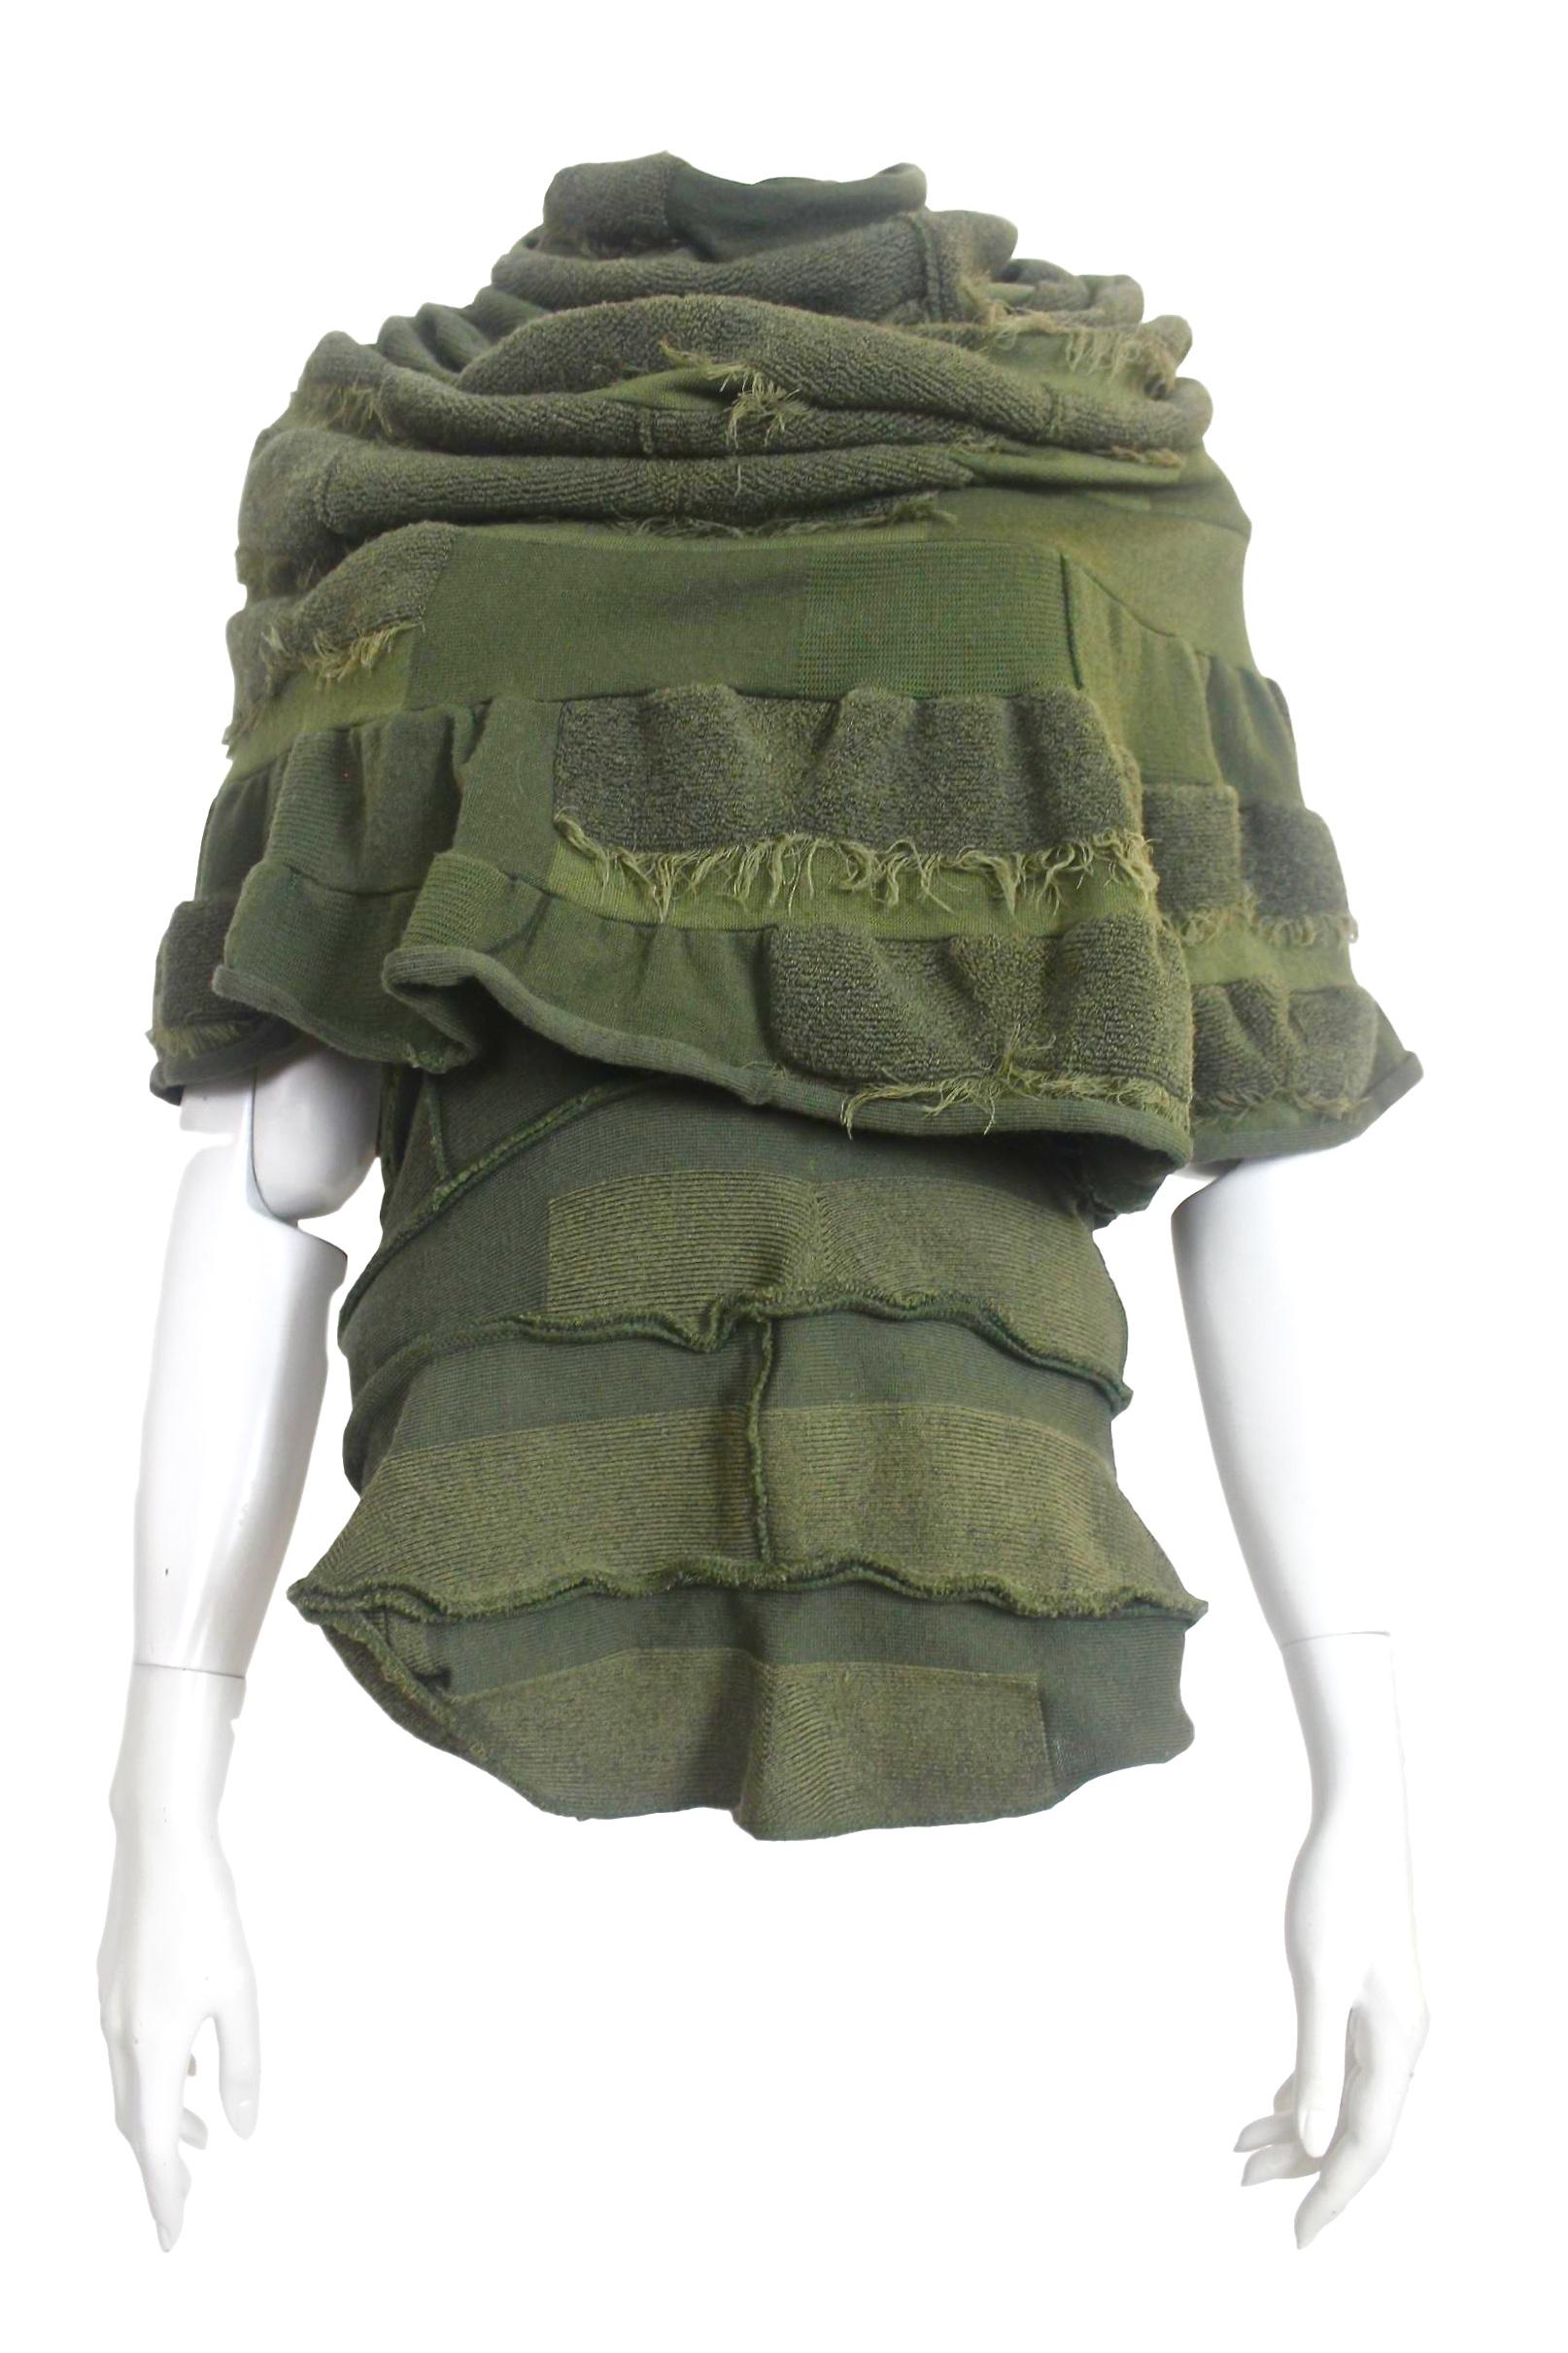 Comme des Garçons Junya Watanabe 2006 Collection Military Knitted Poncho 12